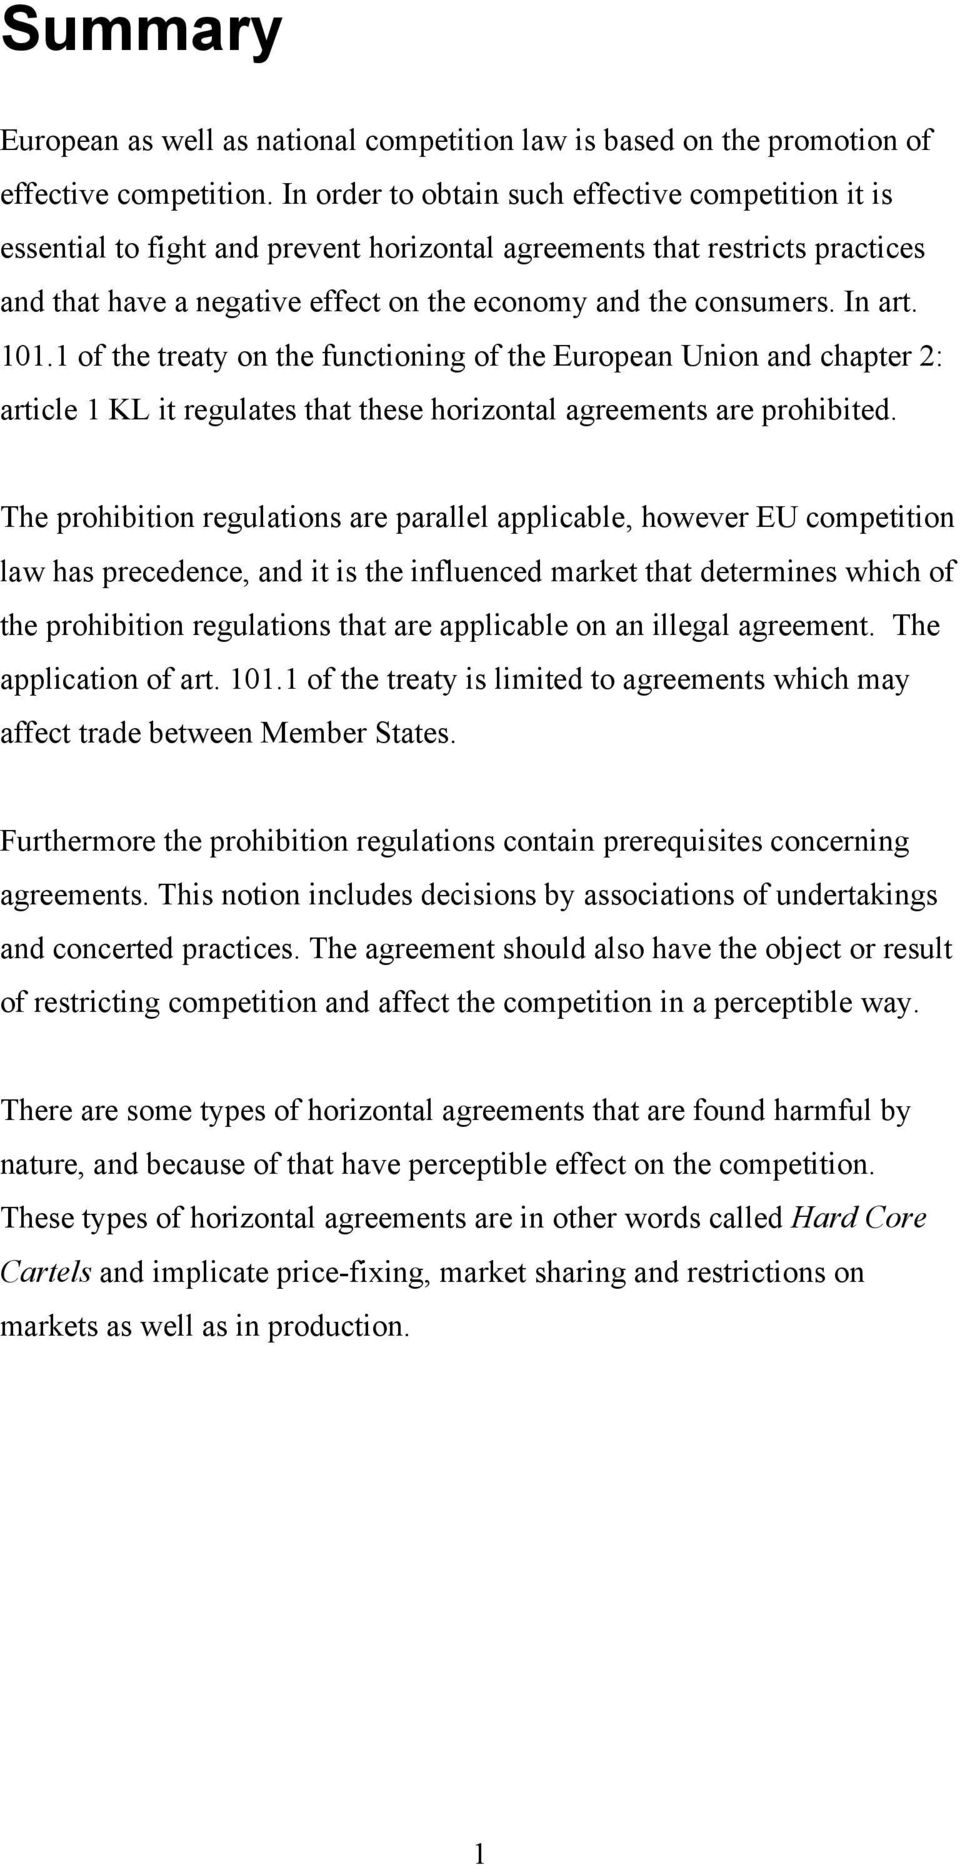 In art. 101.1 of the treaty on the functioning of the European Union and chapter 2: article 1 KL it regulates that these horizontal agreements are prohibited.